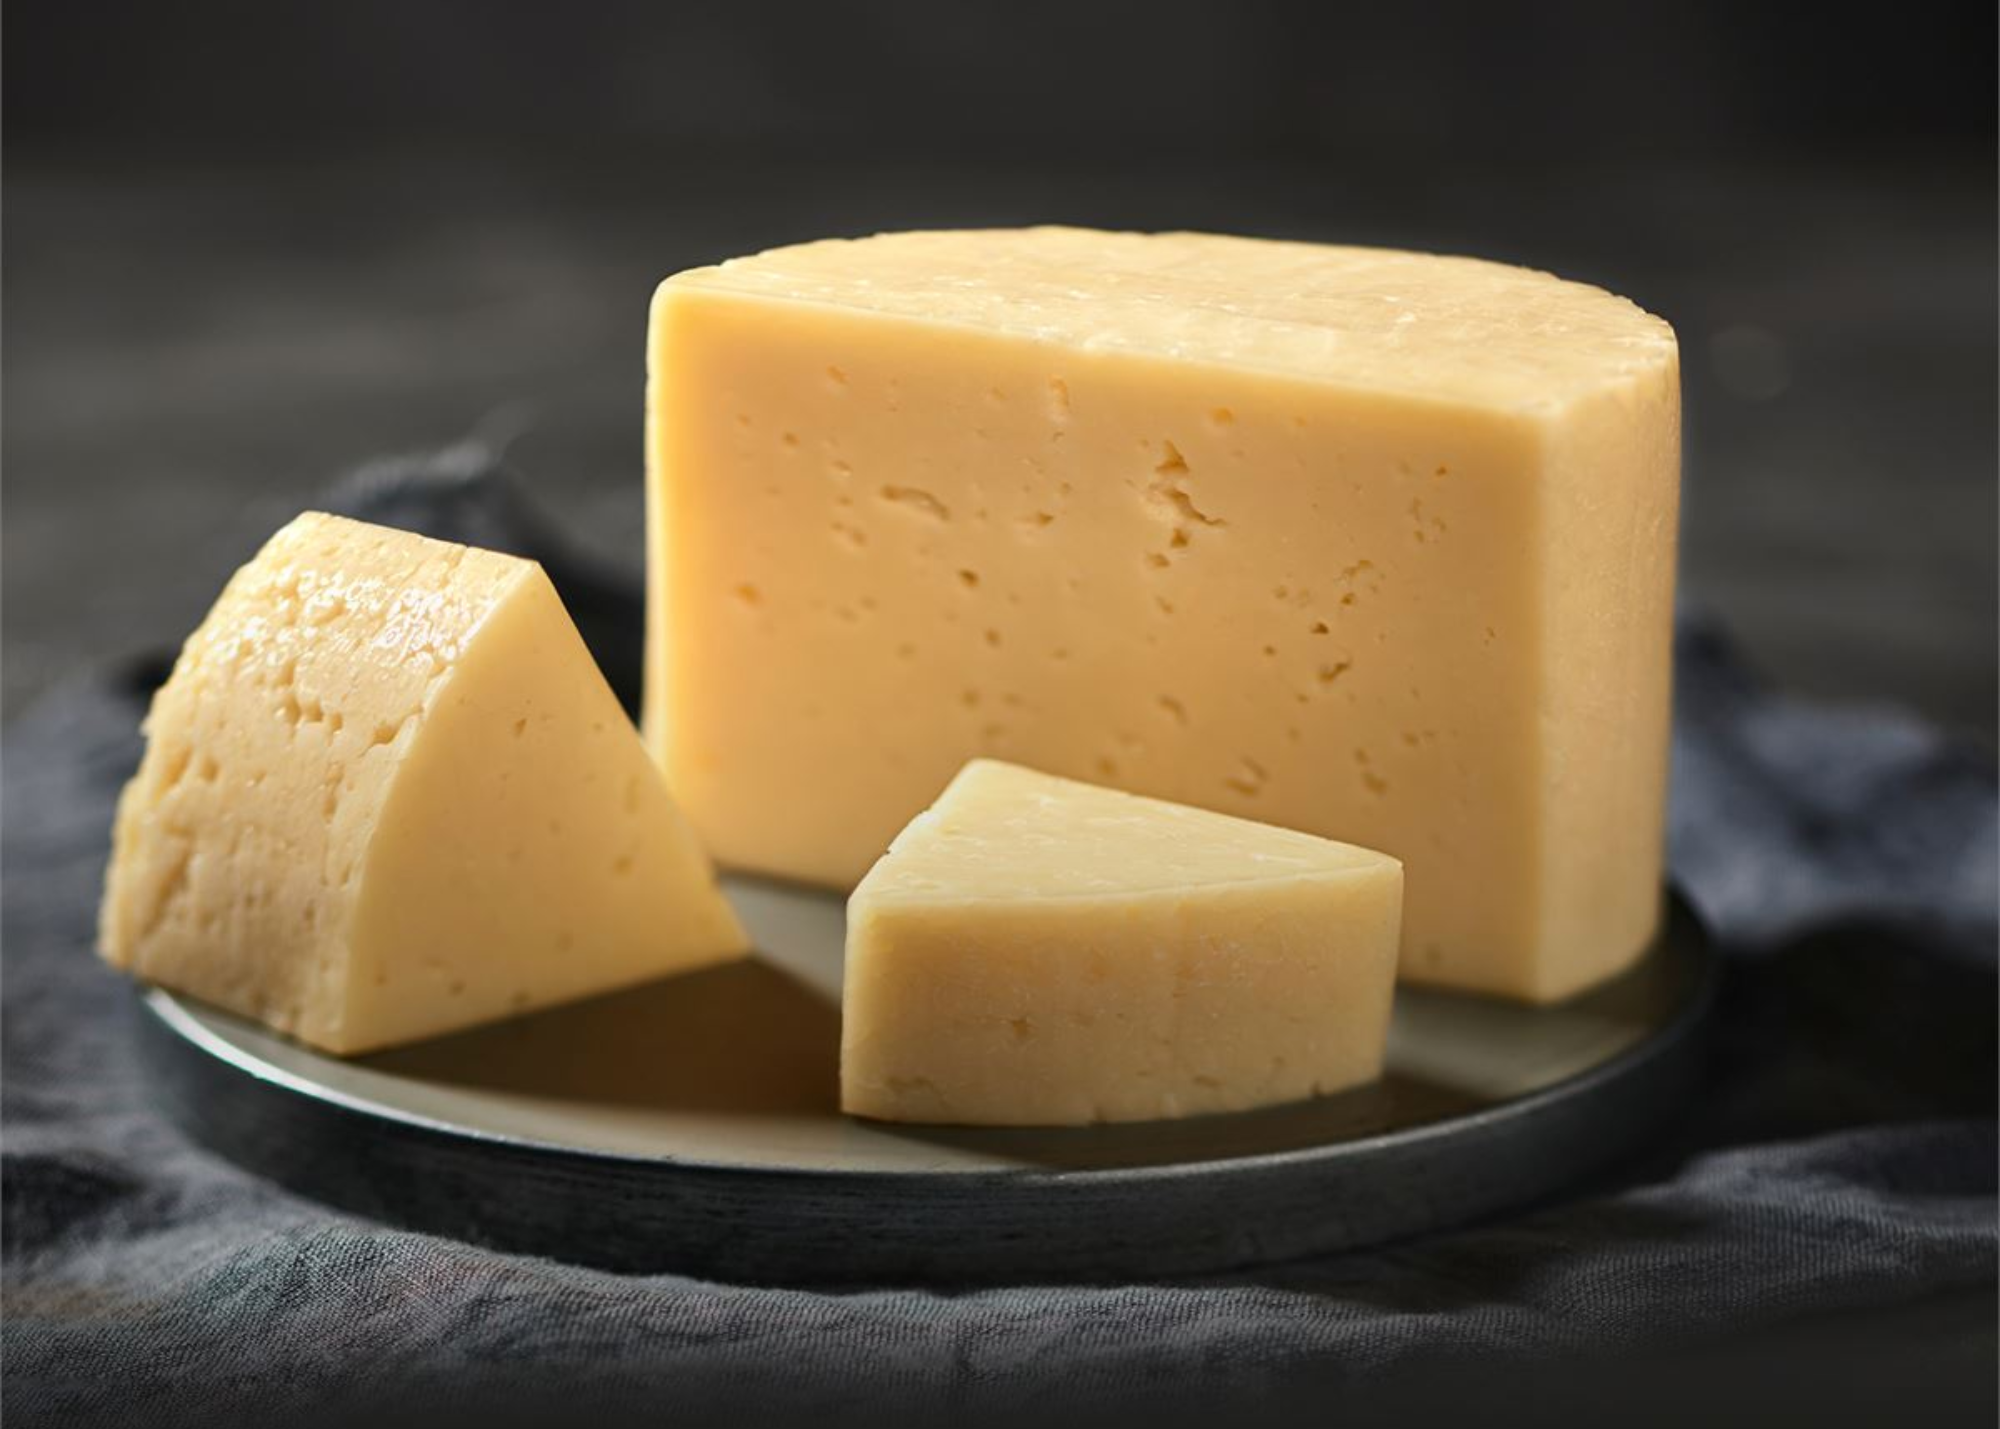 A whole Tilsit cheese is cut into small pieces, revealing numerous small holes and cracks